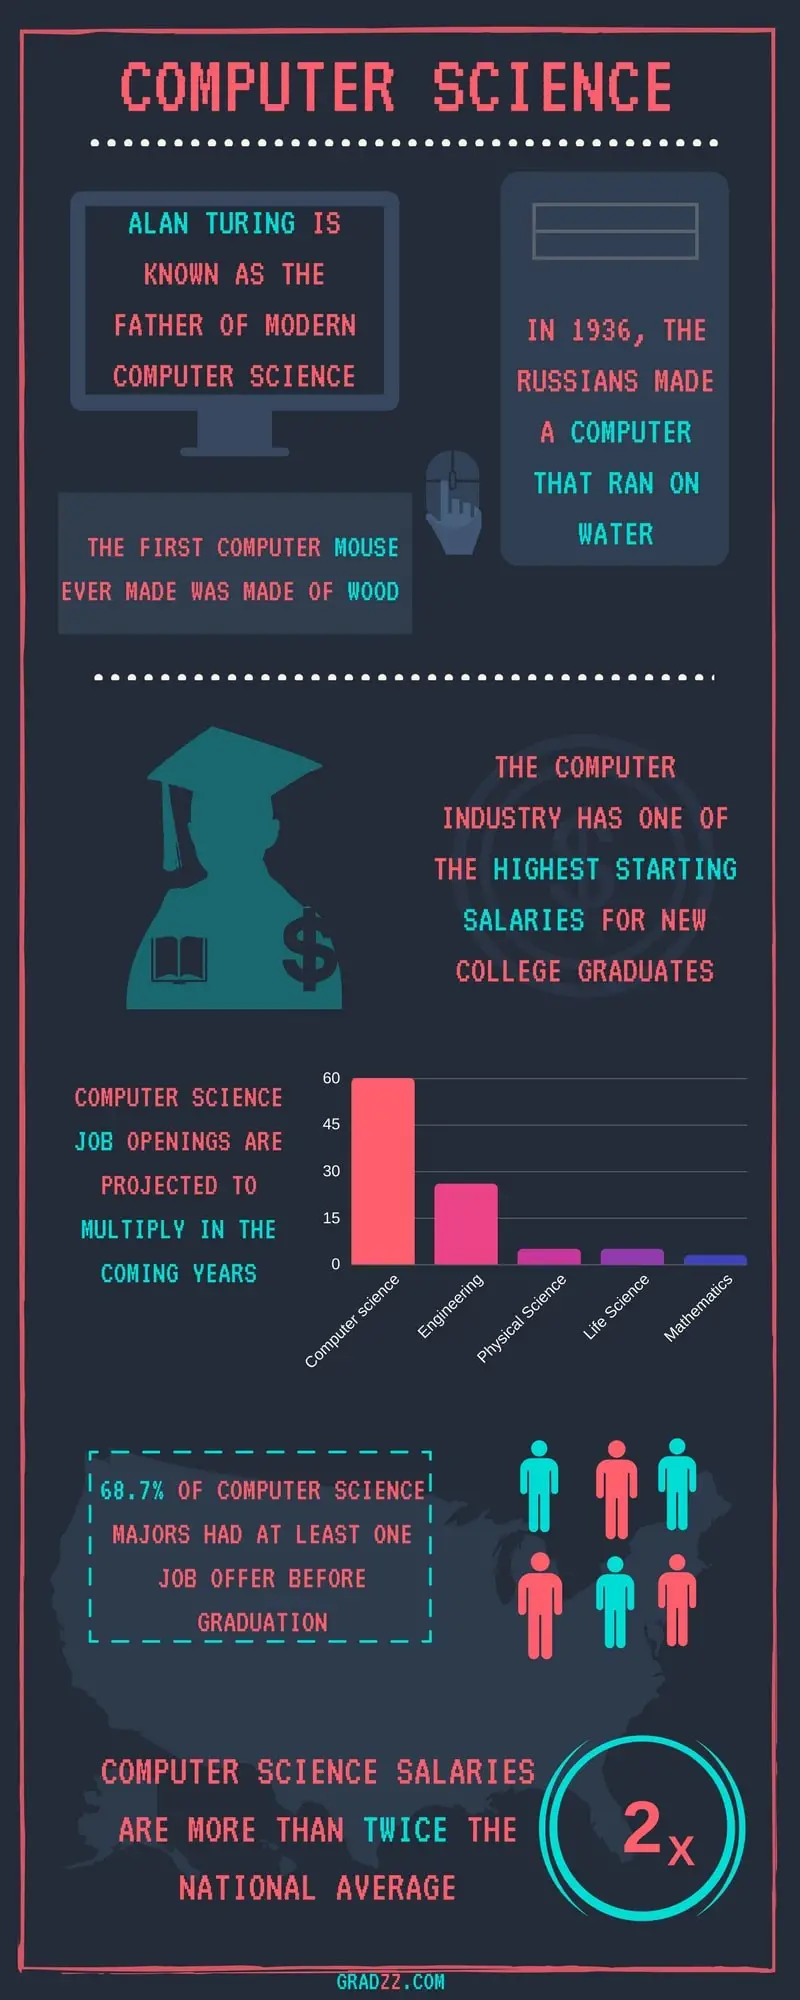 Computer Science Degree, Requirements, Tuition Cost, Jobs and Salary